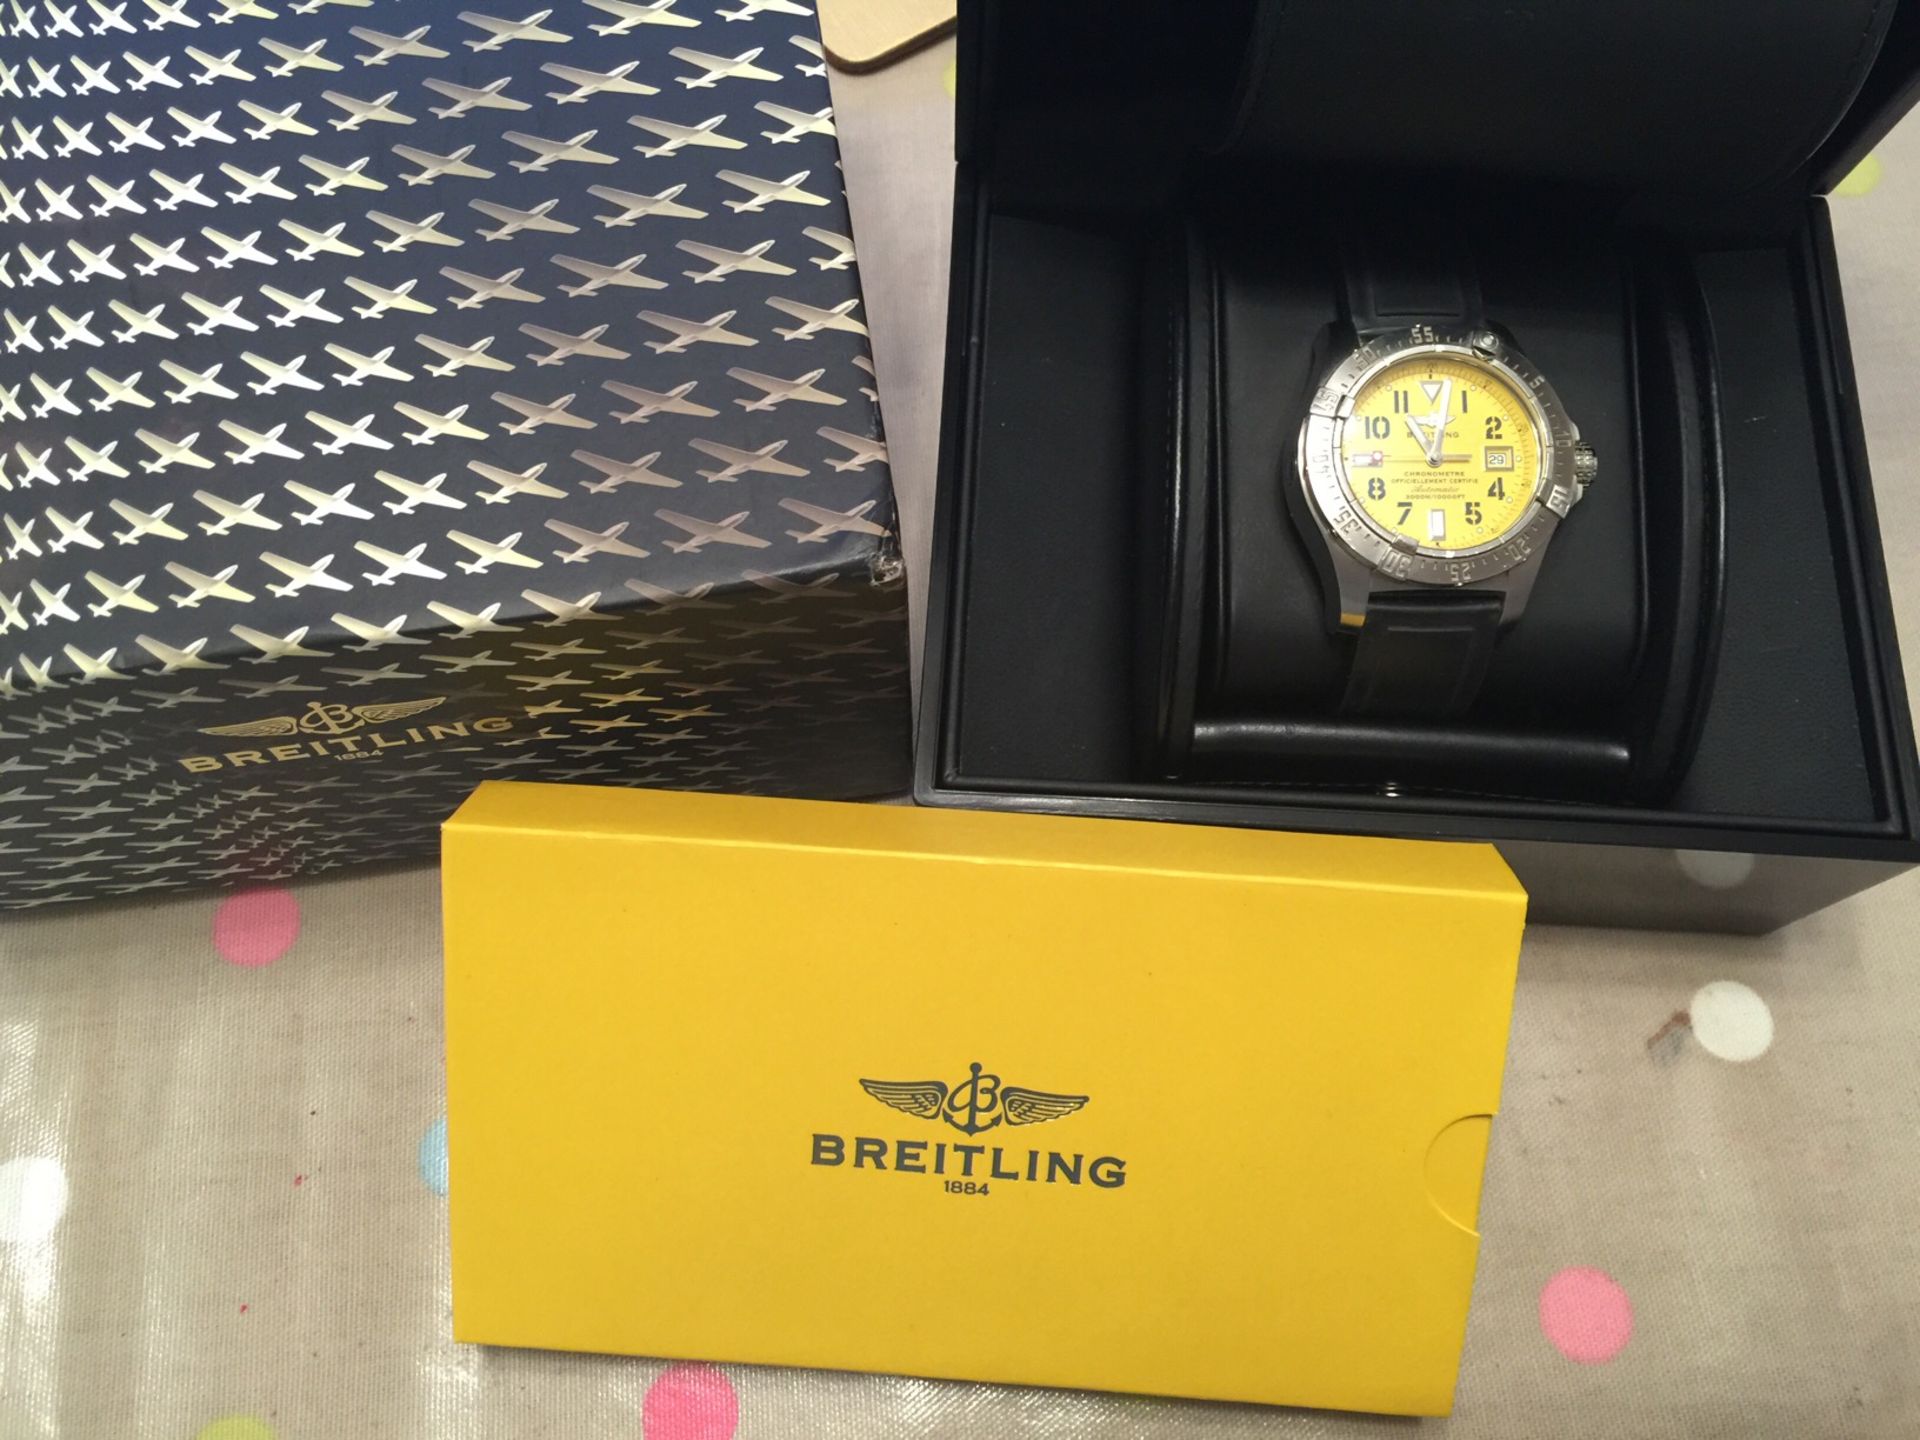 AUTOMATIC BREITLING RARE 'YELLOW FACE' WATCH WITH BOX AND PAPERS AVENGER SEAWOLF MODEL - Image 3 of 6